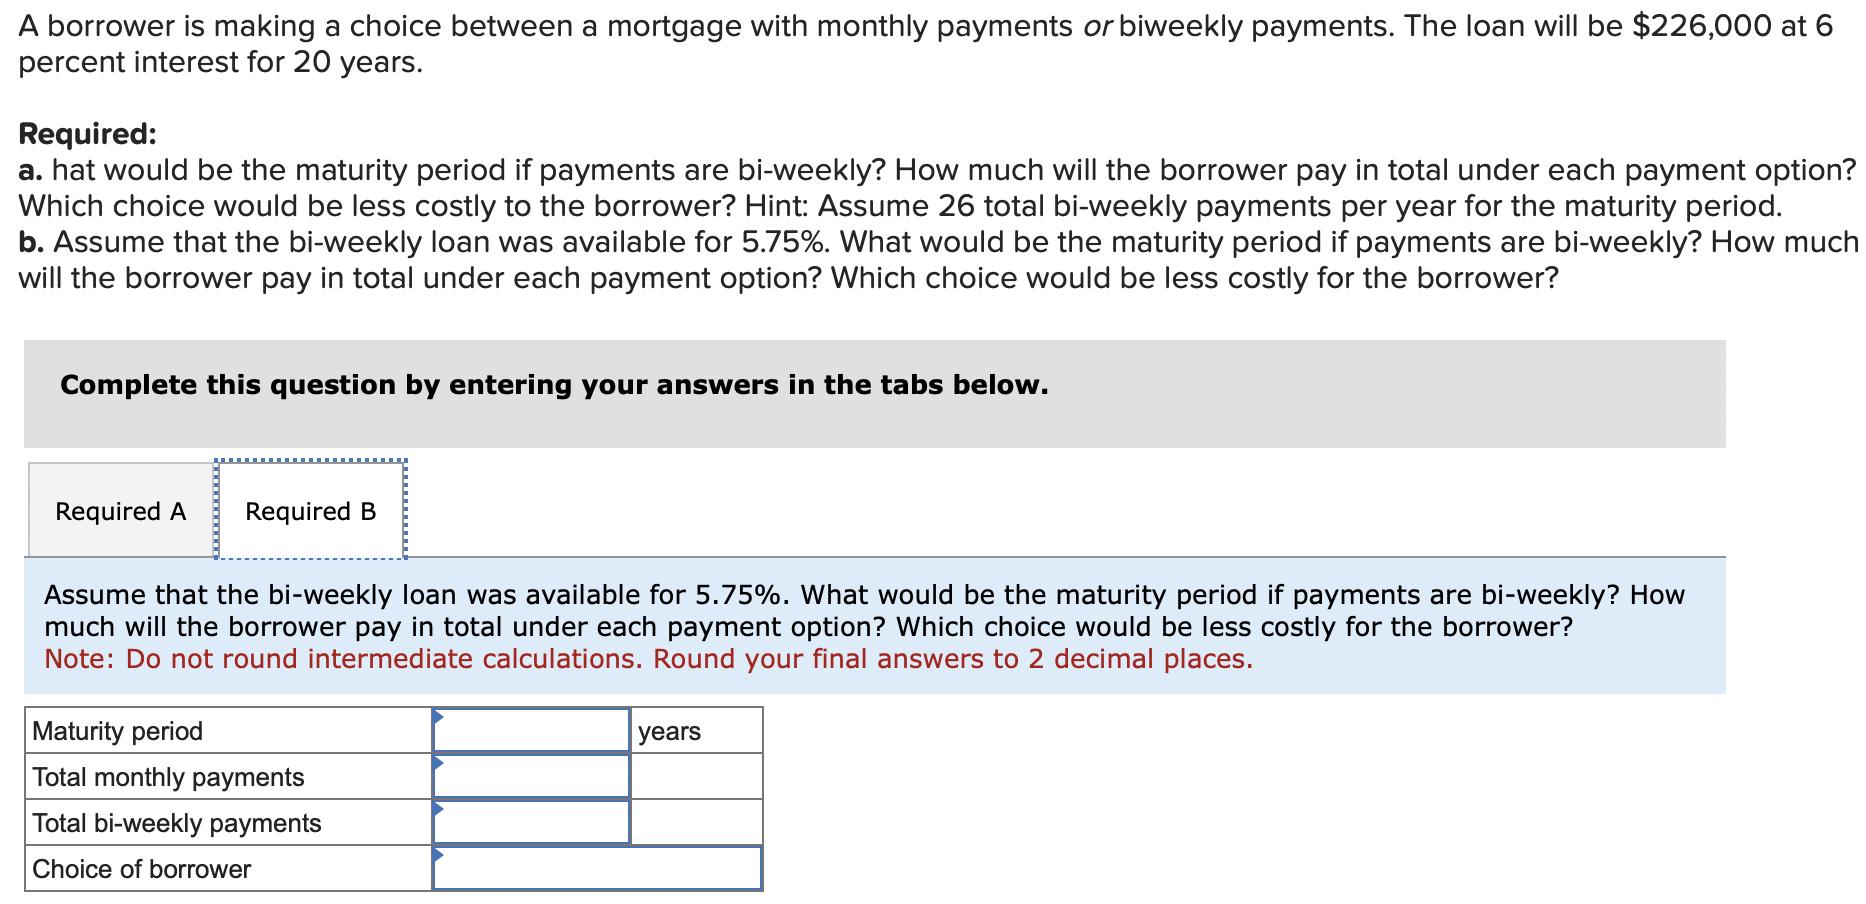 A borrower is making a choice between a mortgage with monthly payments or biweekly payments. The loan will be ( $ 226,000 